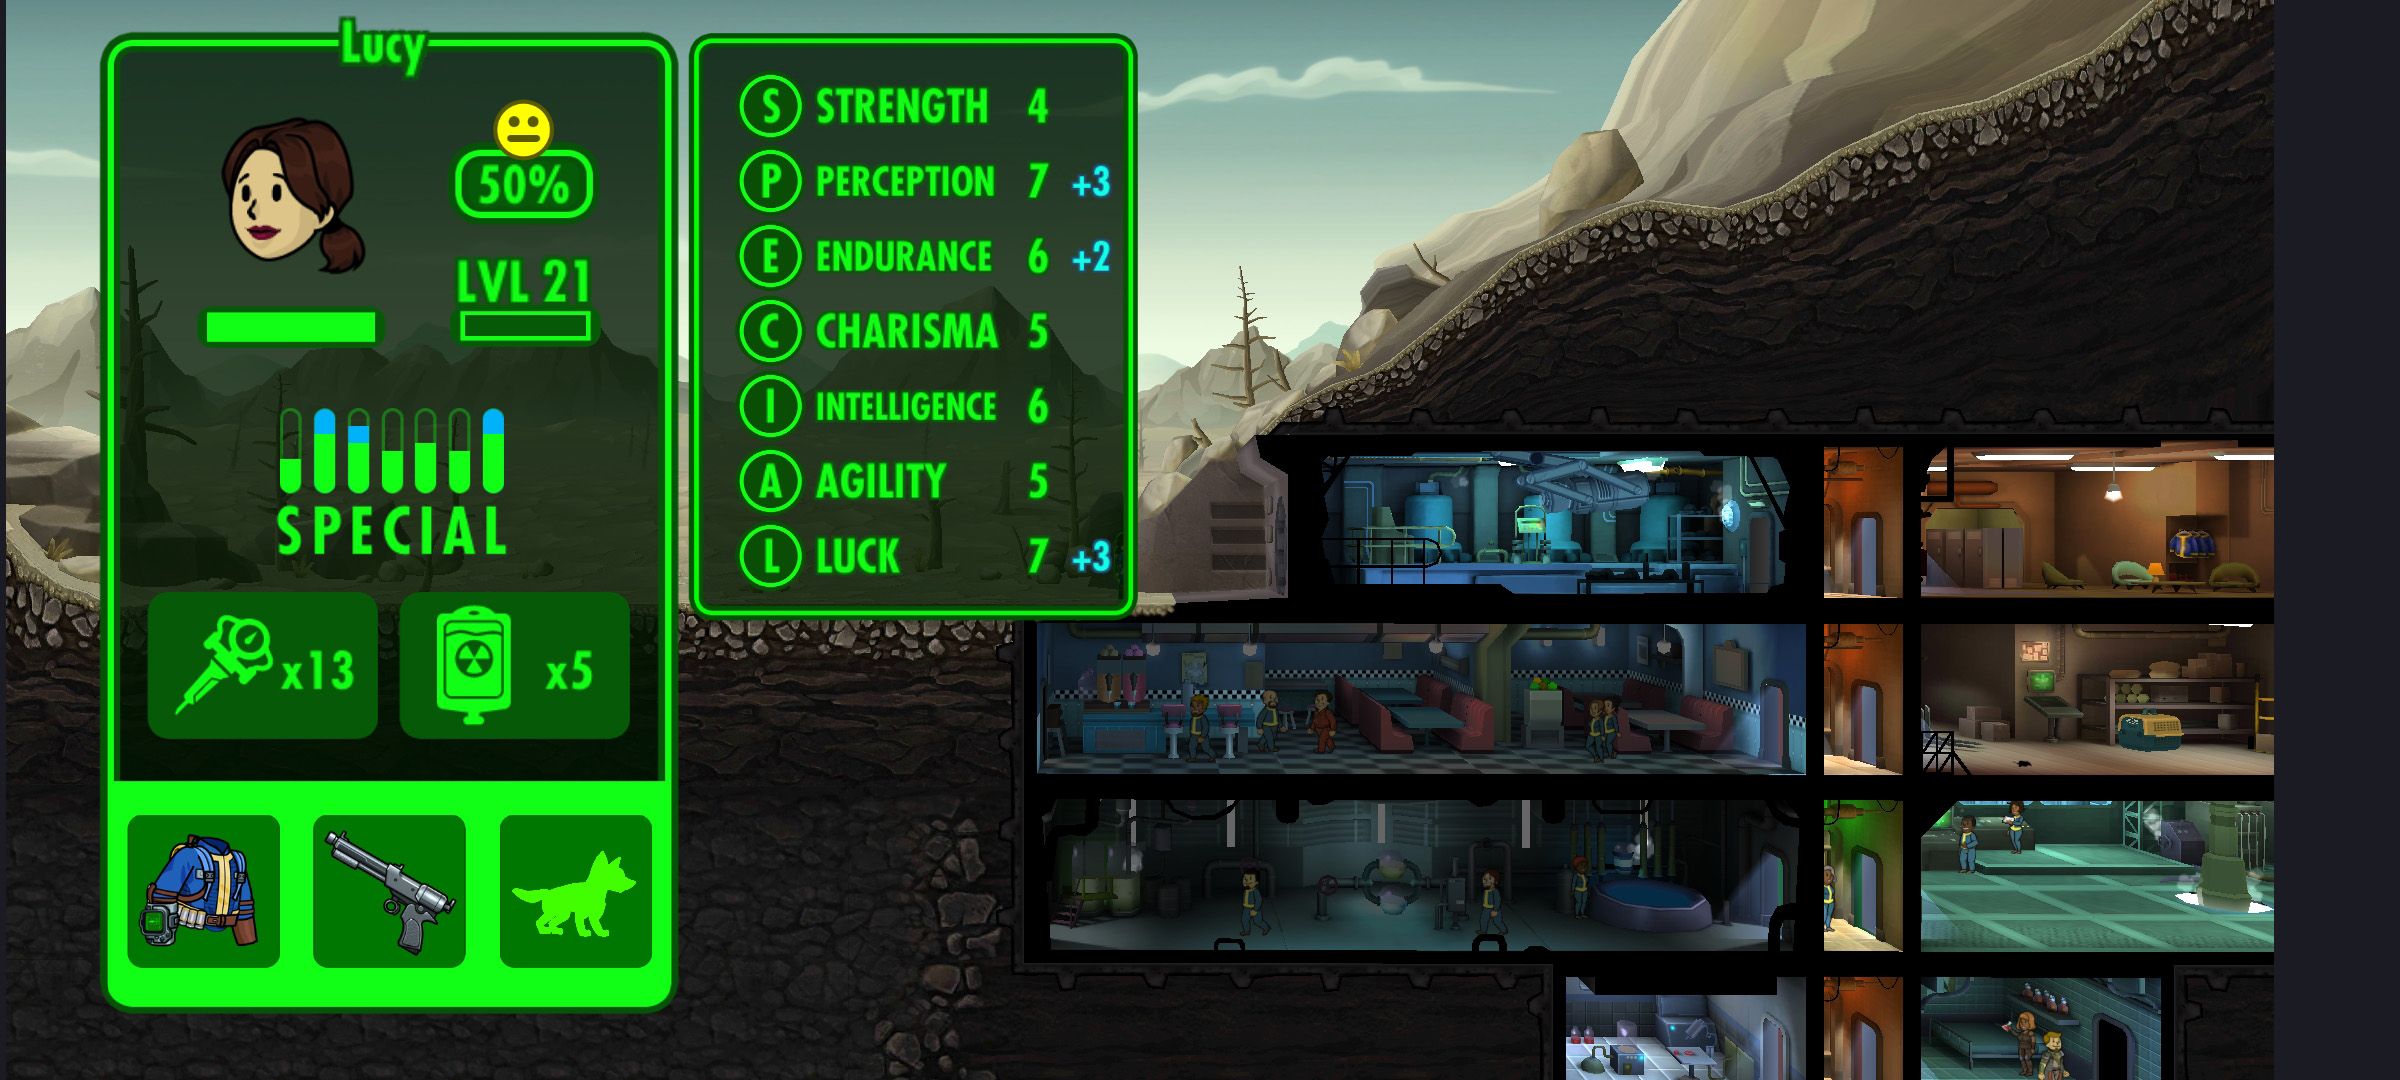 Fallout Shelter Lucy stats